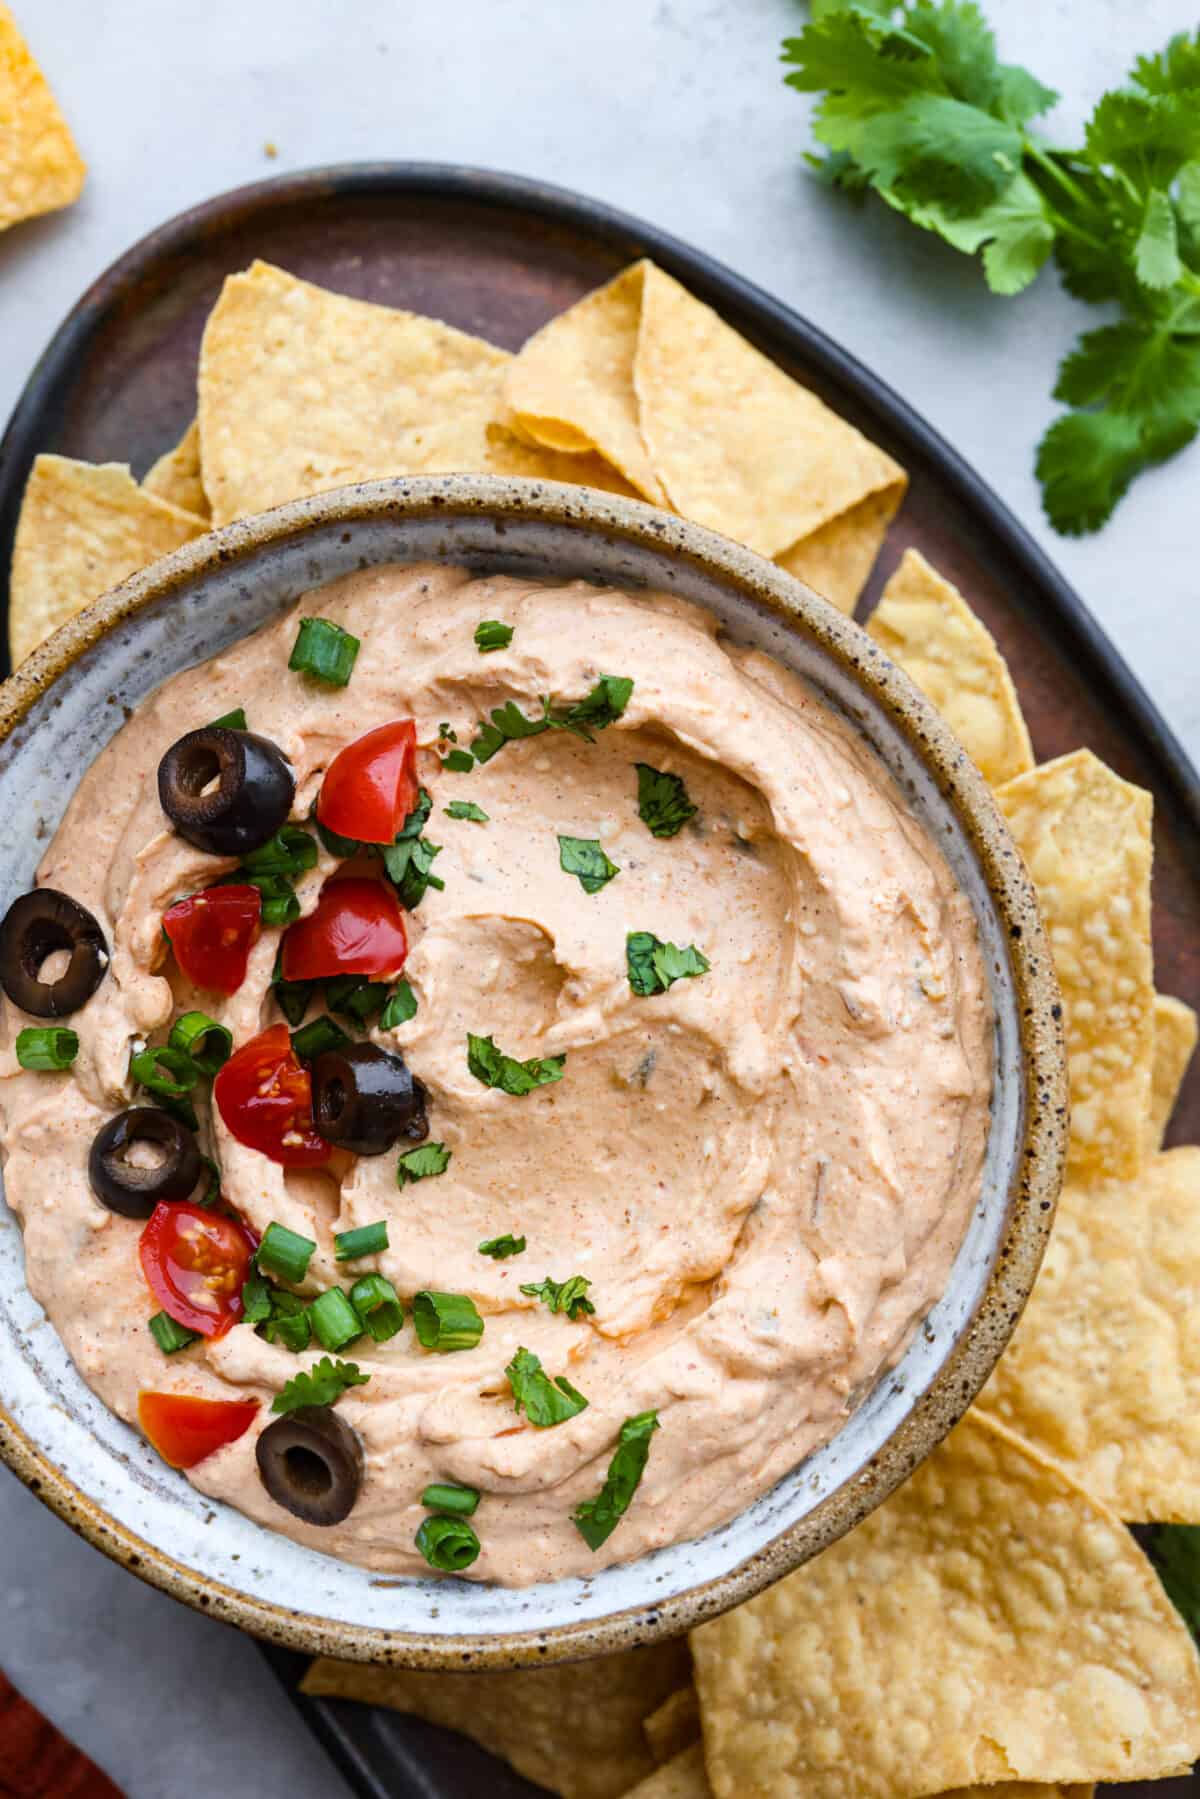 Hero image of taco dip garnished with tomatoes, olives, and cilantro in a stoneware bowl. It is surrounded by tortilla chips.